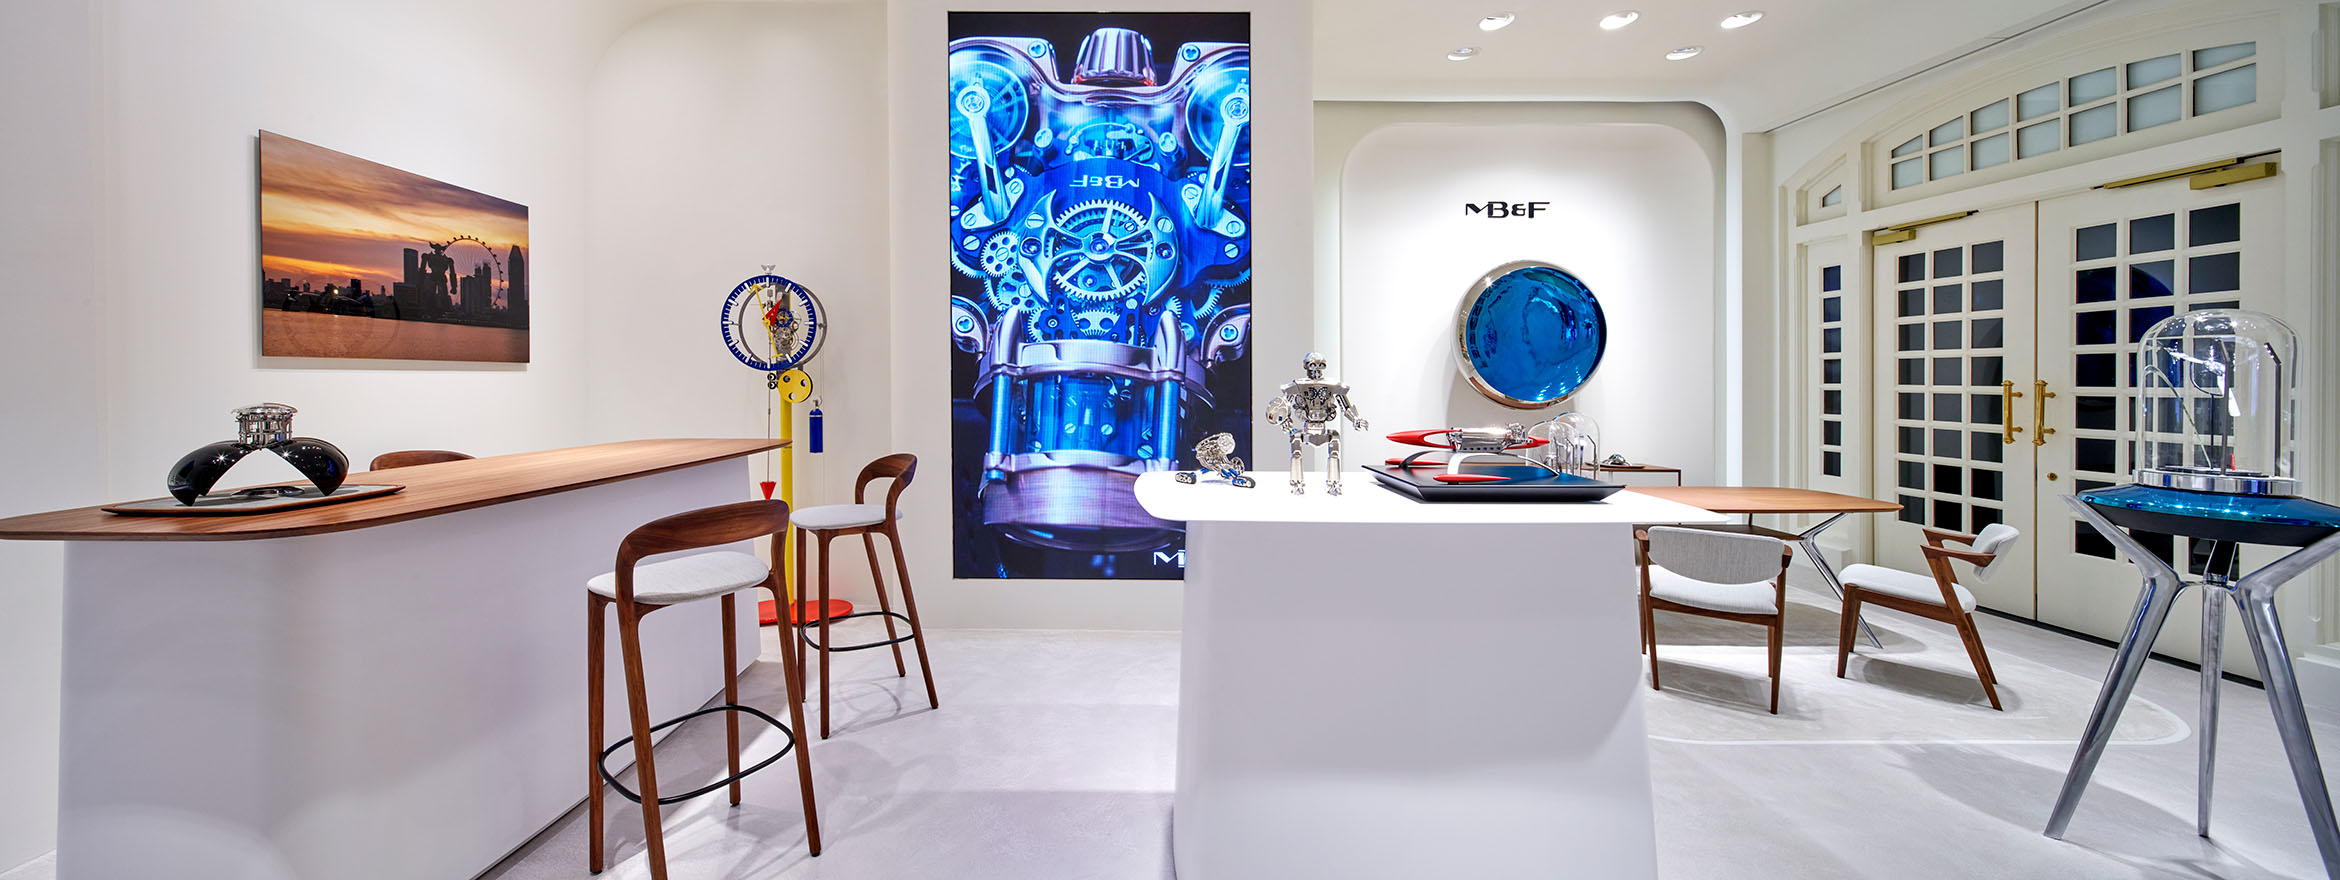 The World’s First MB&F Lab Opens at the Iconic Raffles Hotel in Singapore